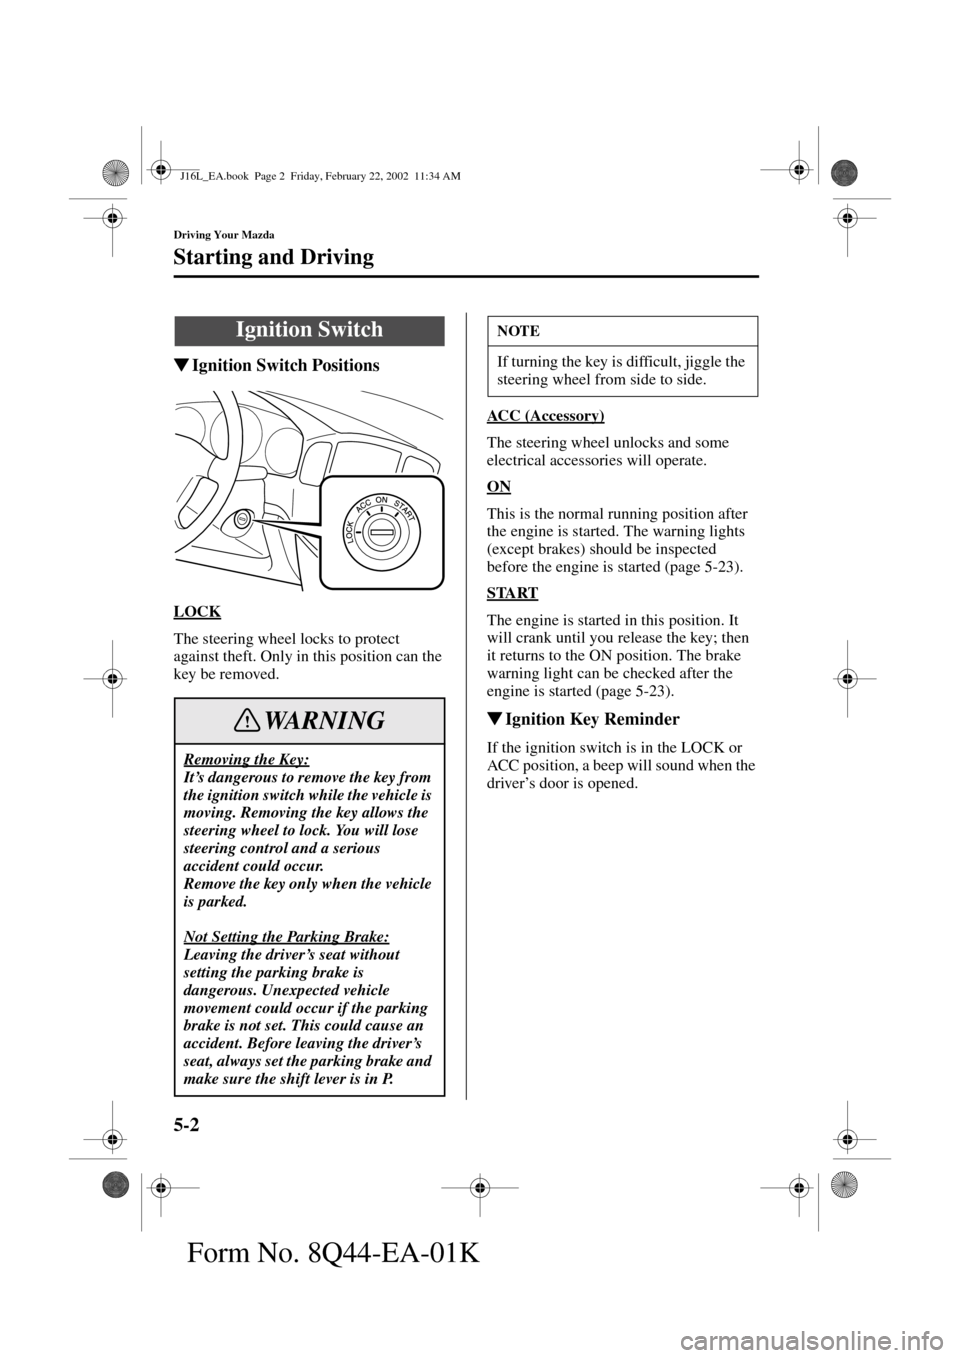 MAZDA MODEL MPV 2002  Owners Manual (in English) 5-2
Driving Your Mazda
Form No. 8Q44-EA-01K
Starting and Driving
Ignition Switch Positions
LOCK
The steering wheel locks to protect 
against theft. Only in this position can the 
key be removed.ACC (